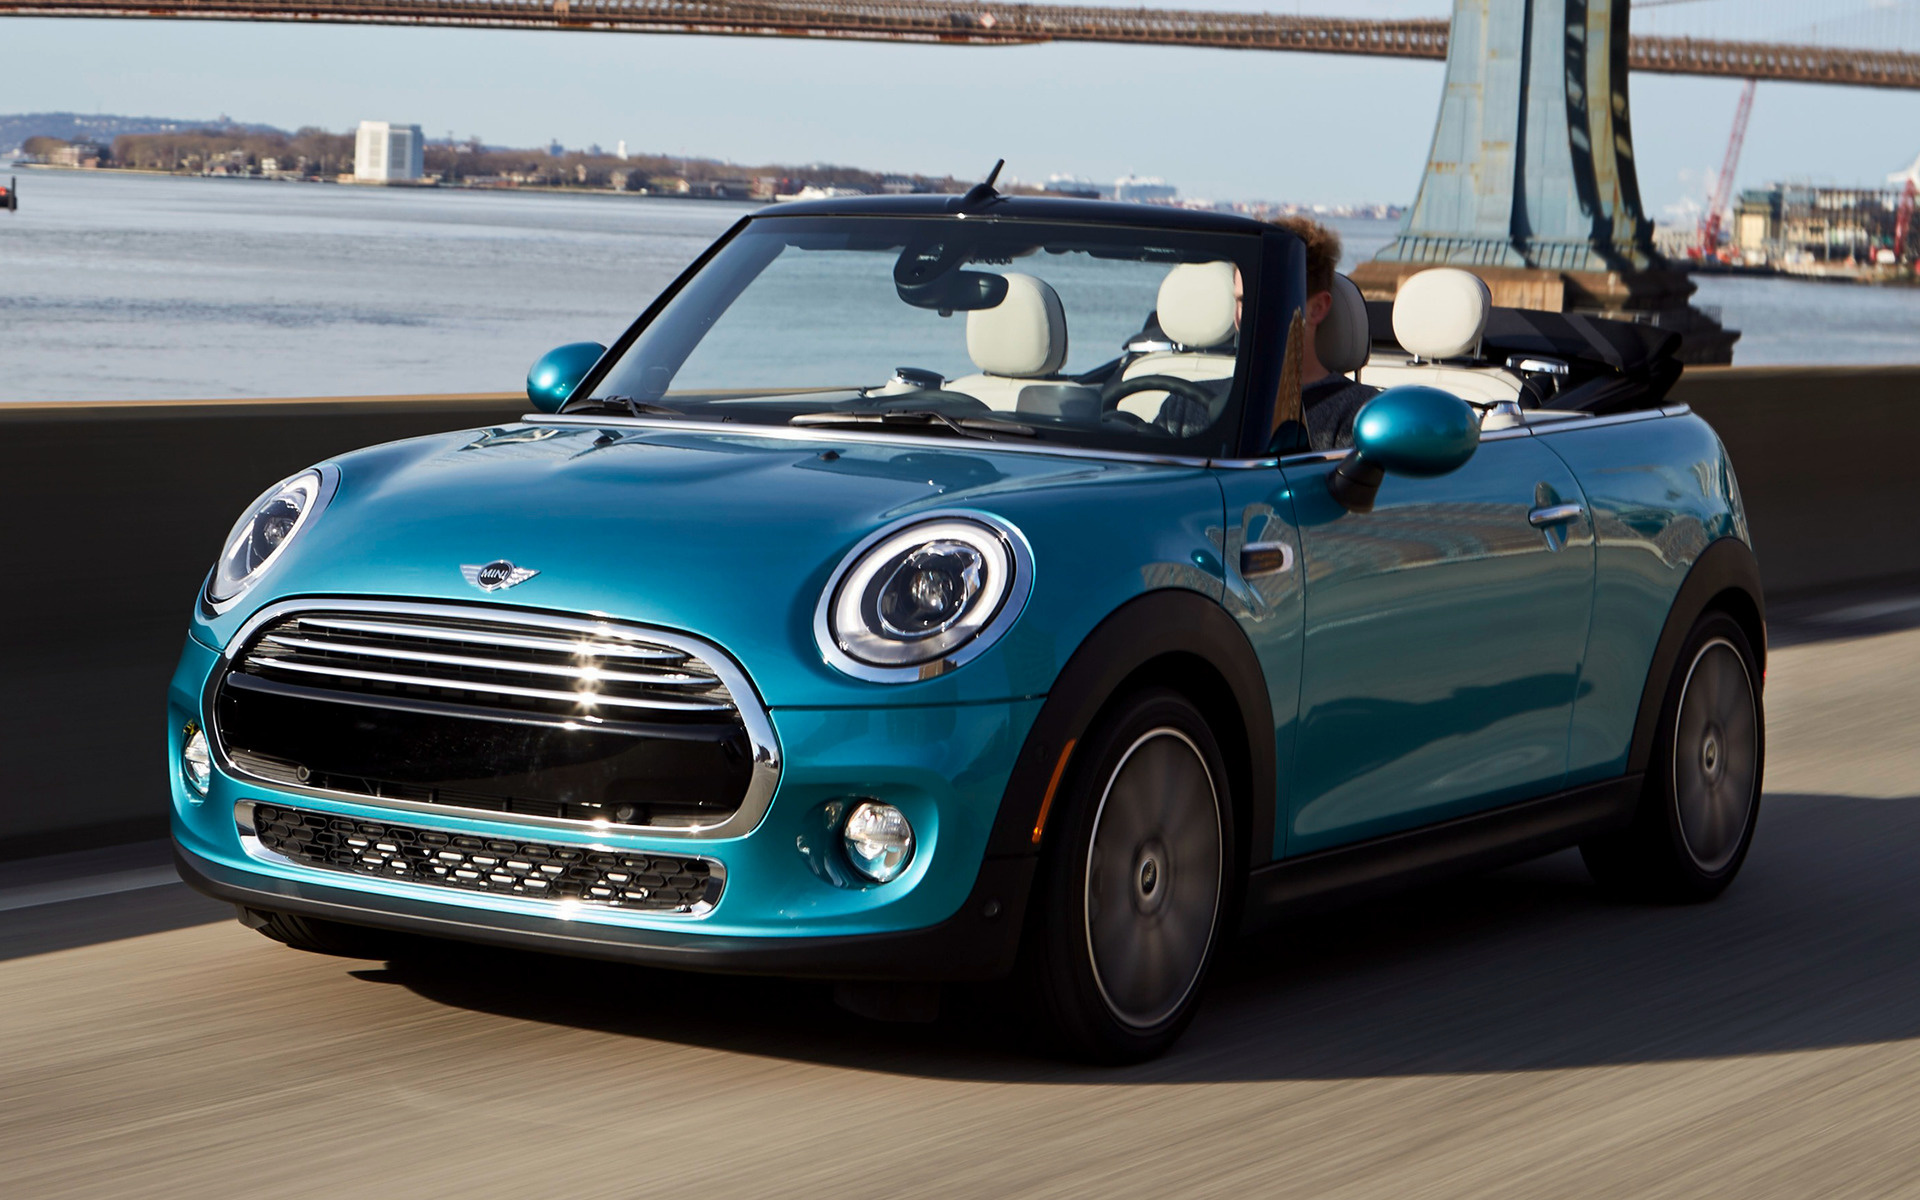 2016 Mini Cooper Convertible (US) - Wallpapers and HD Images | Car Pixel